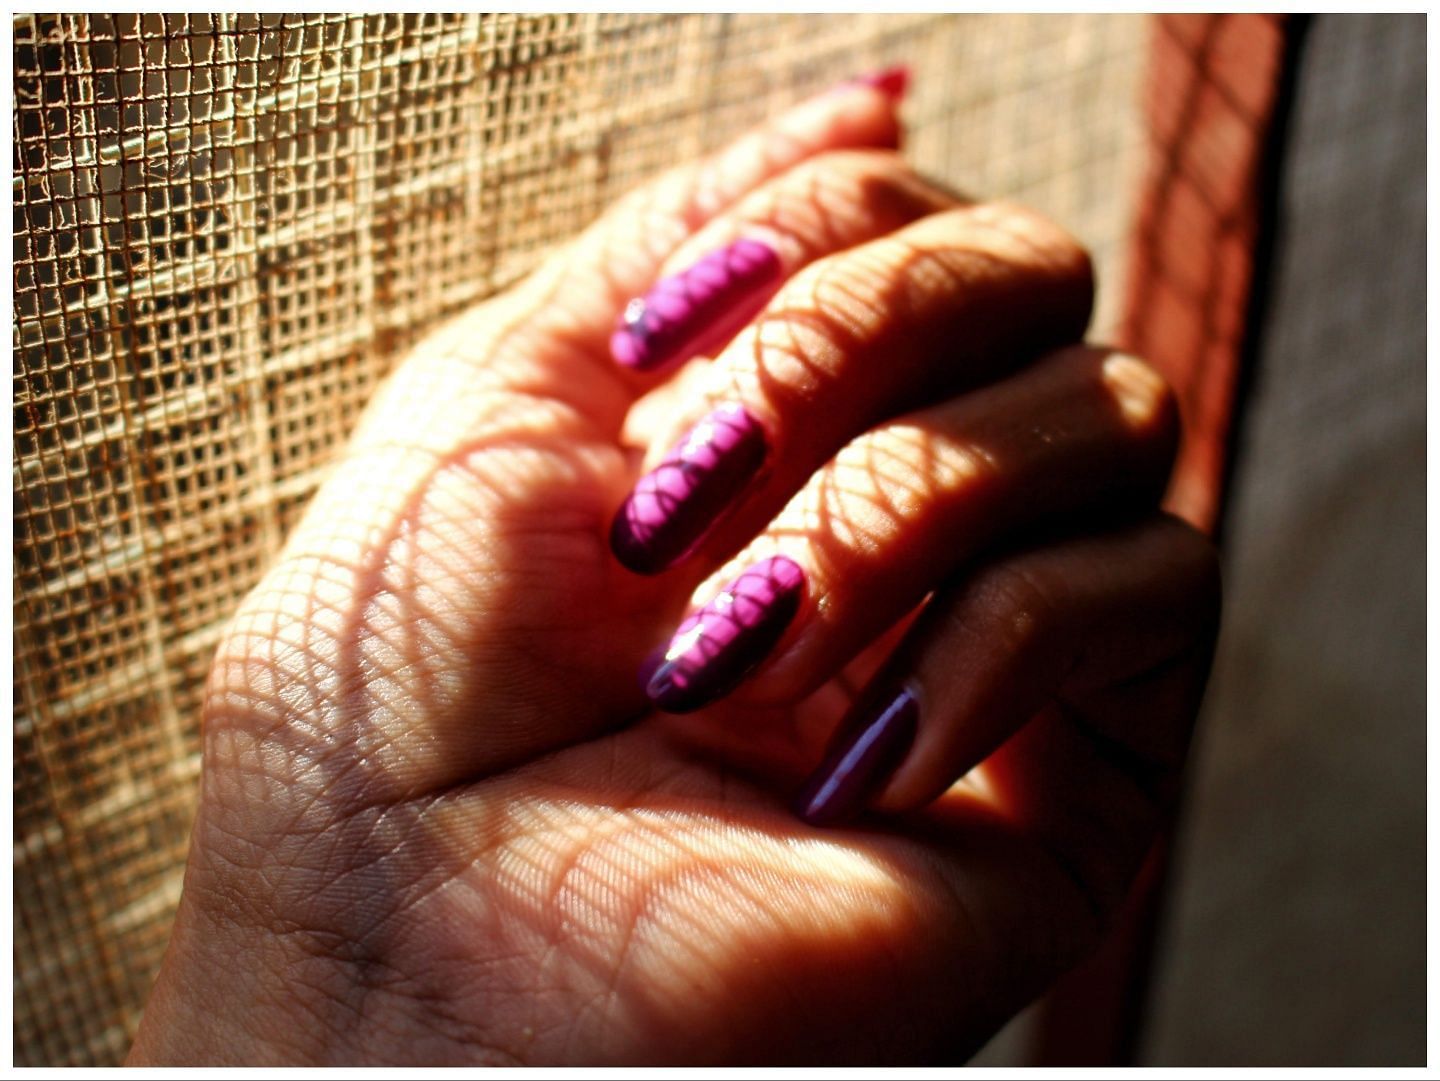 Long nails can be a risk to your health (Image via Vecteezy)